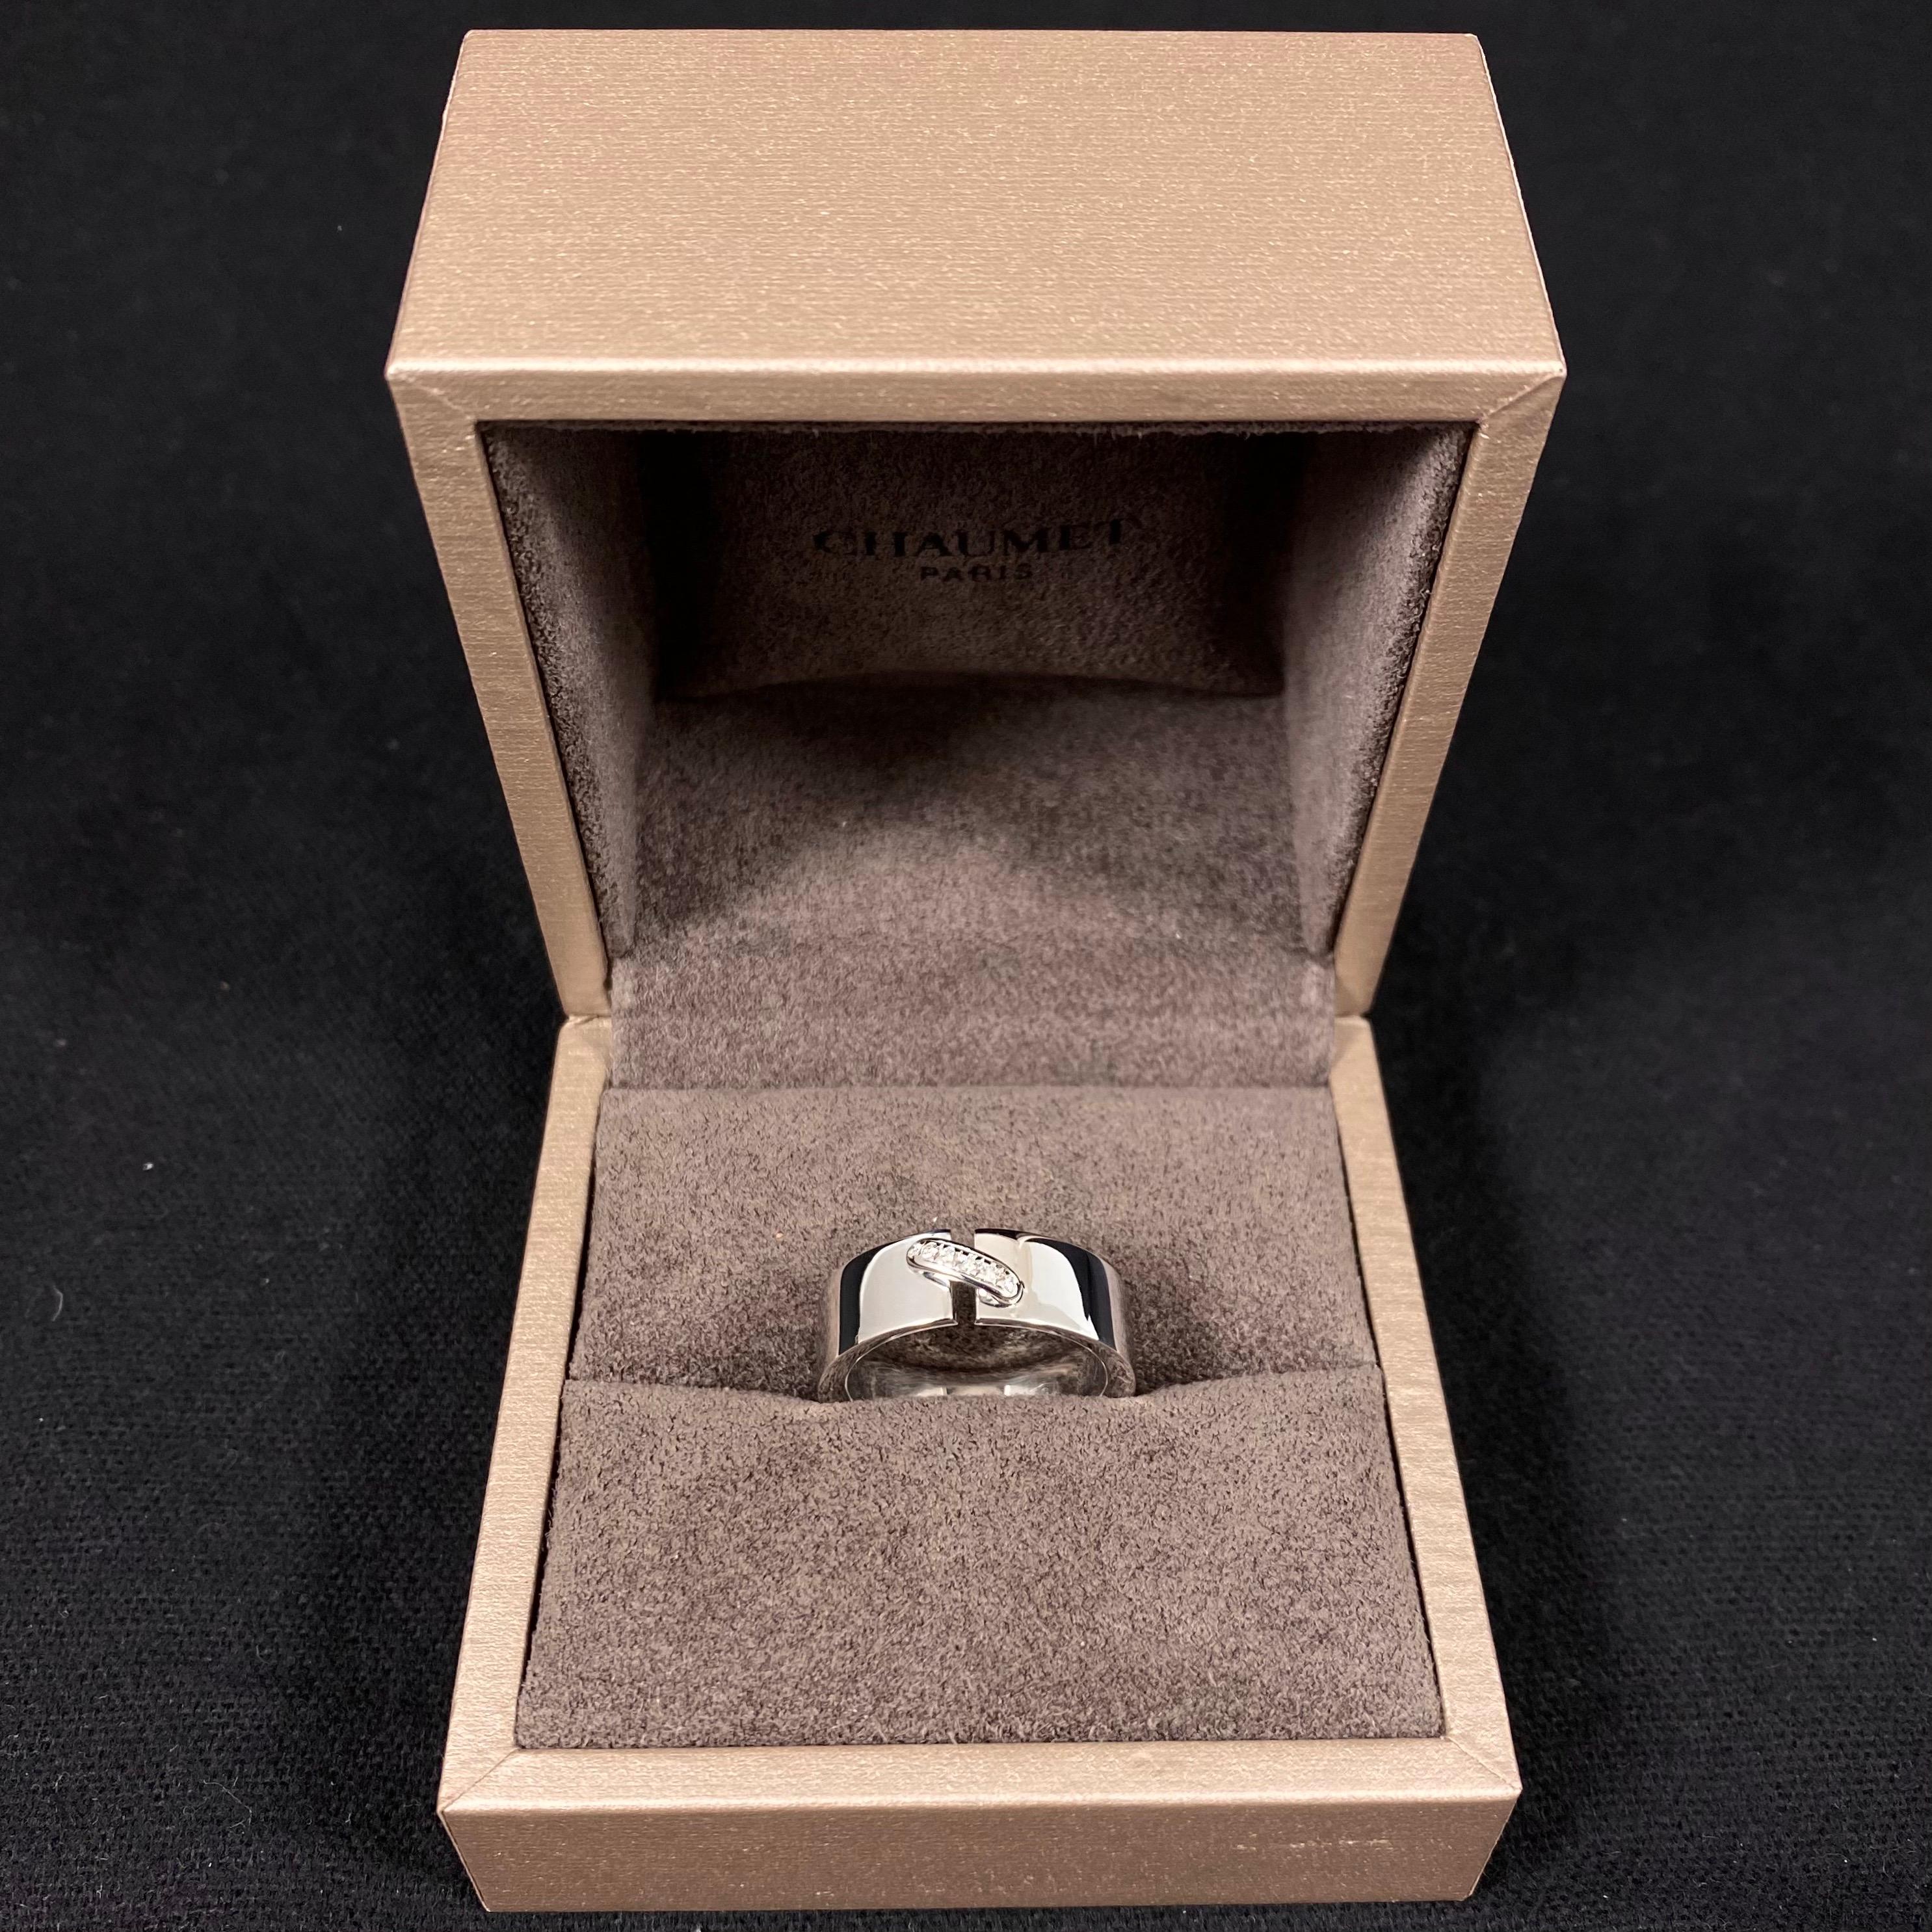 chaumet liens evidence ring price